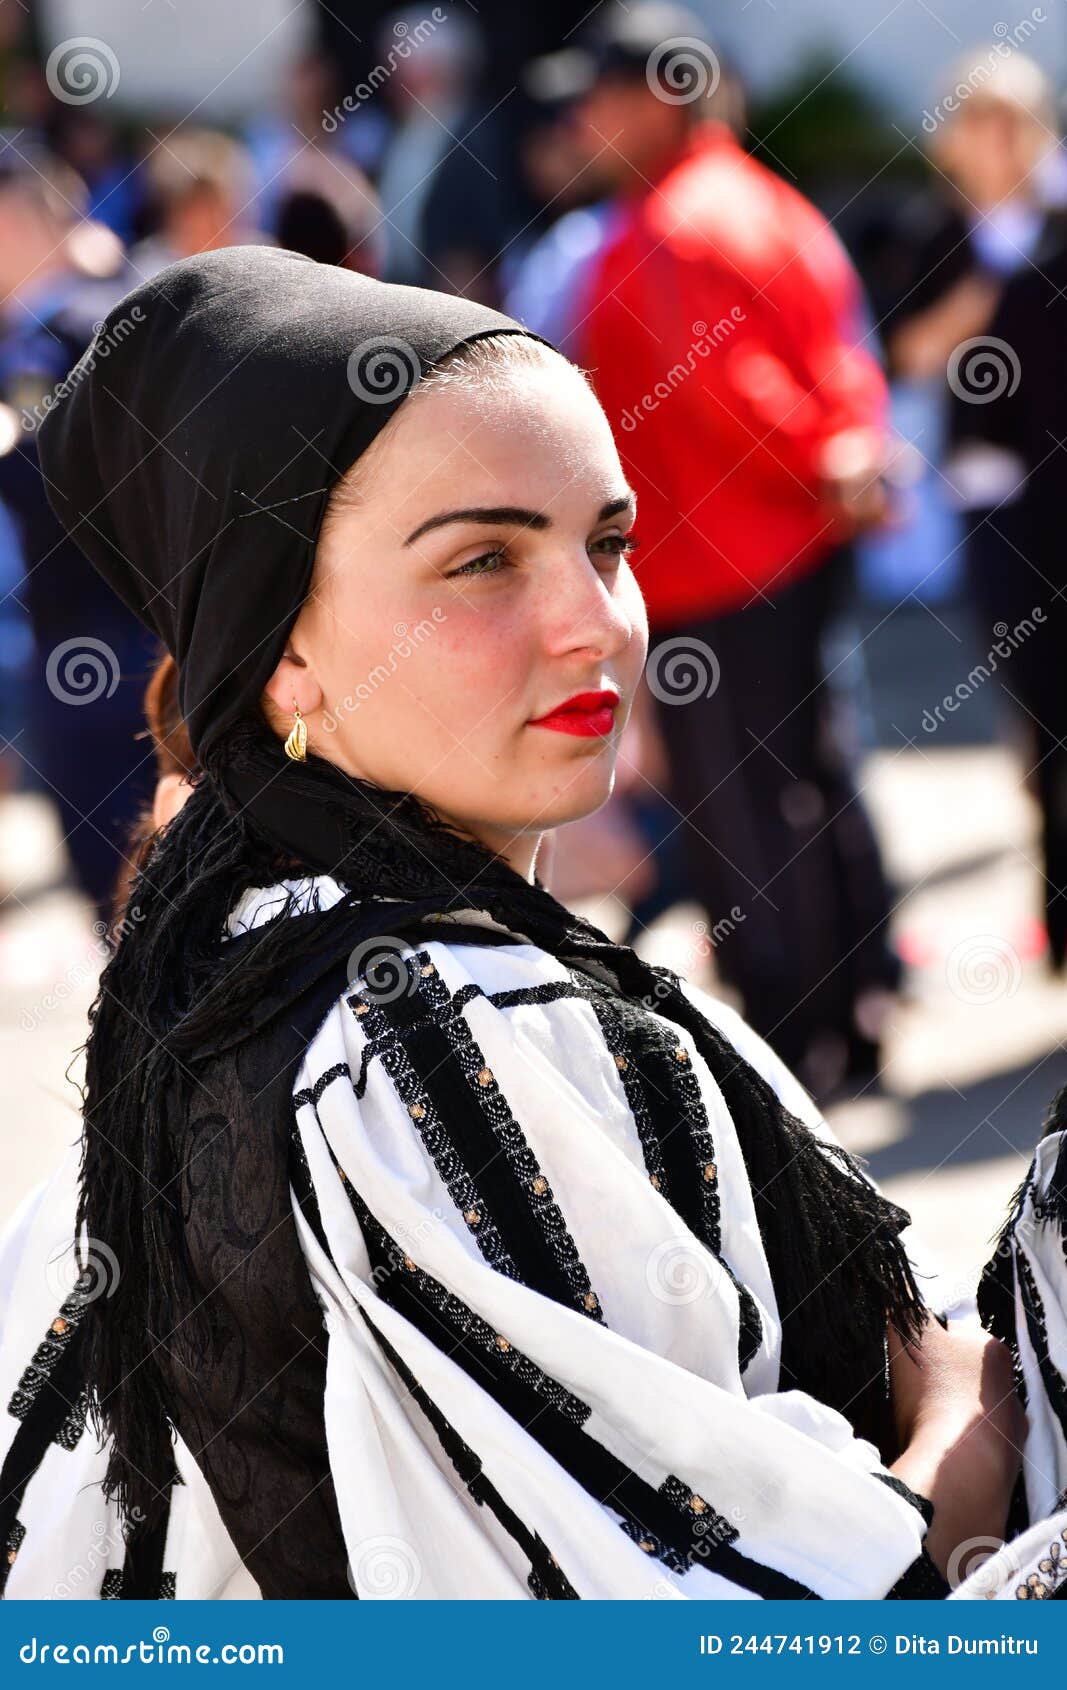 Mob cost Handbook Girl from Novaci Romania Dressed in a National Shepherd S Costume 16  Editorial Photography - Image of cloth, headscarf: 244741912